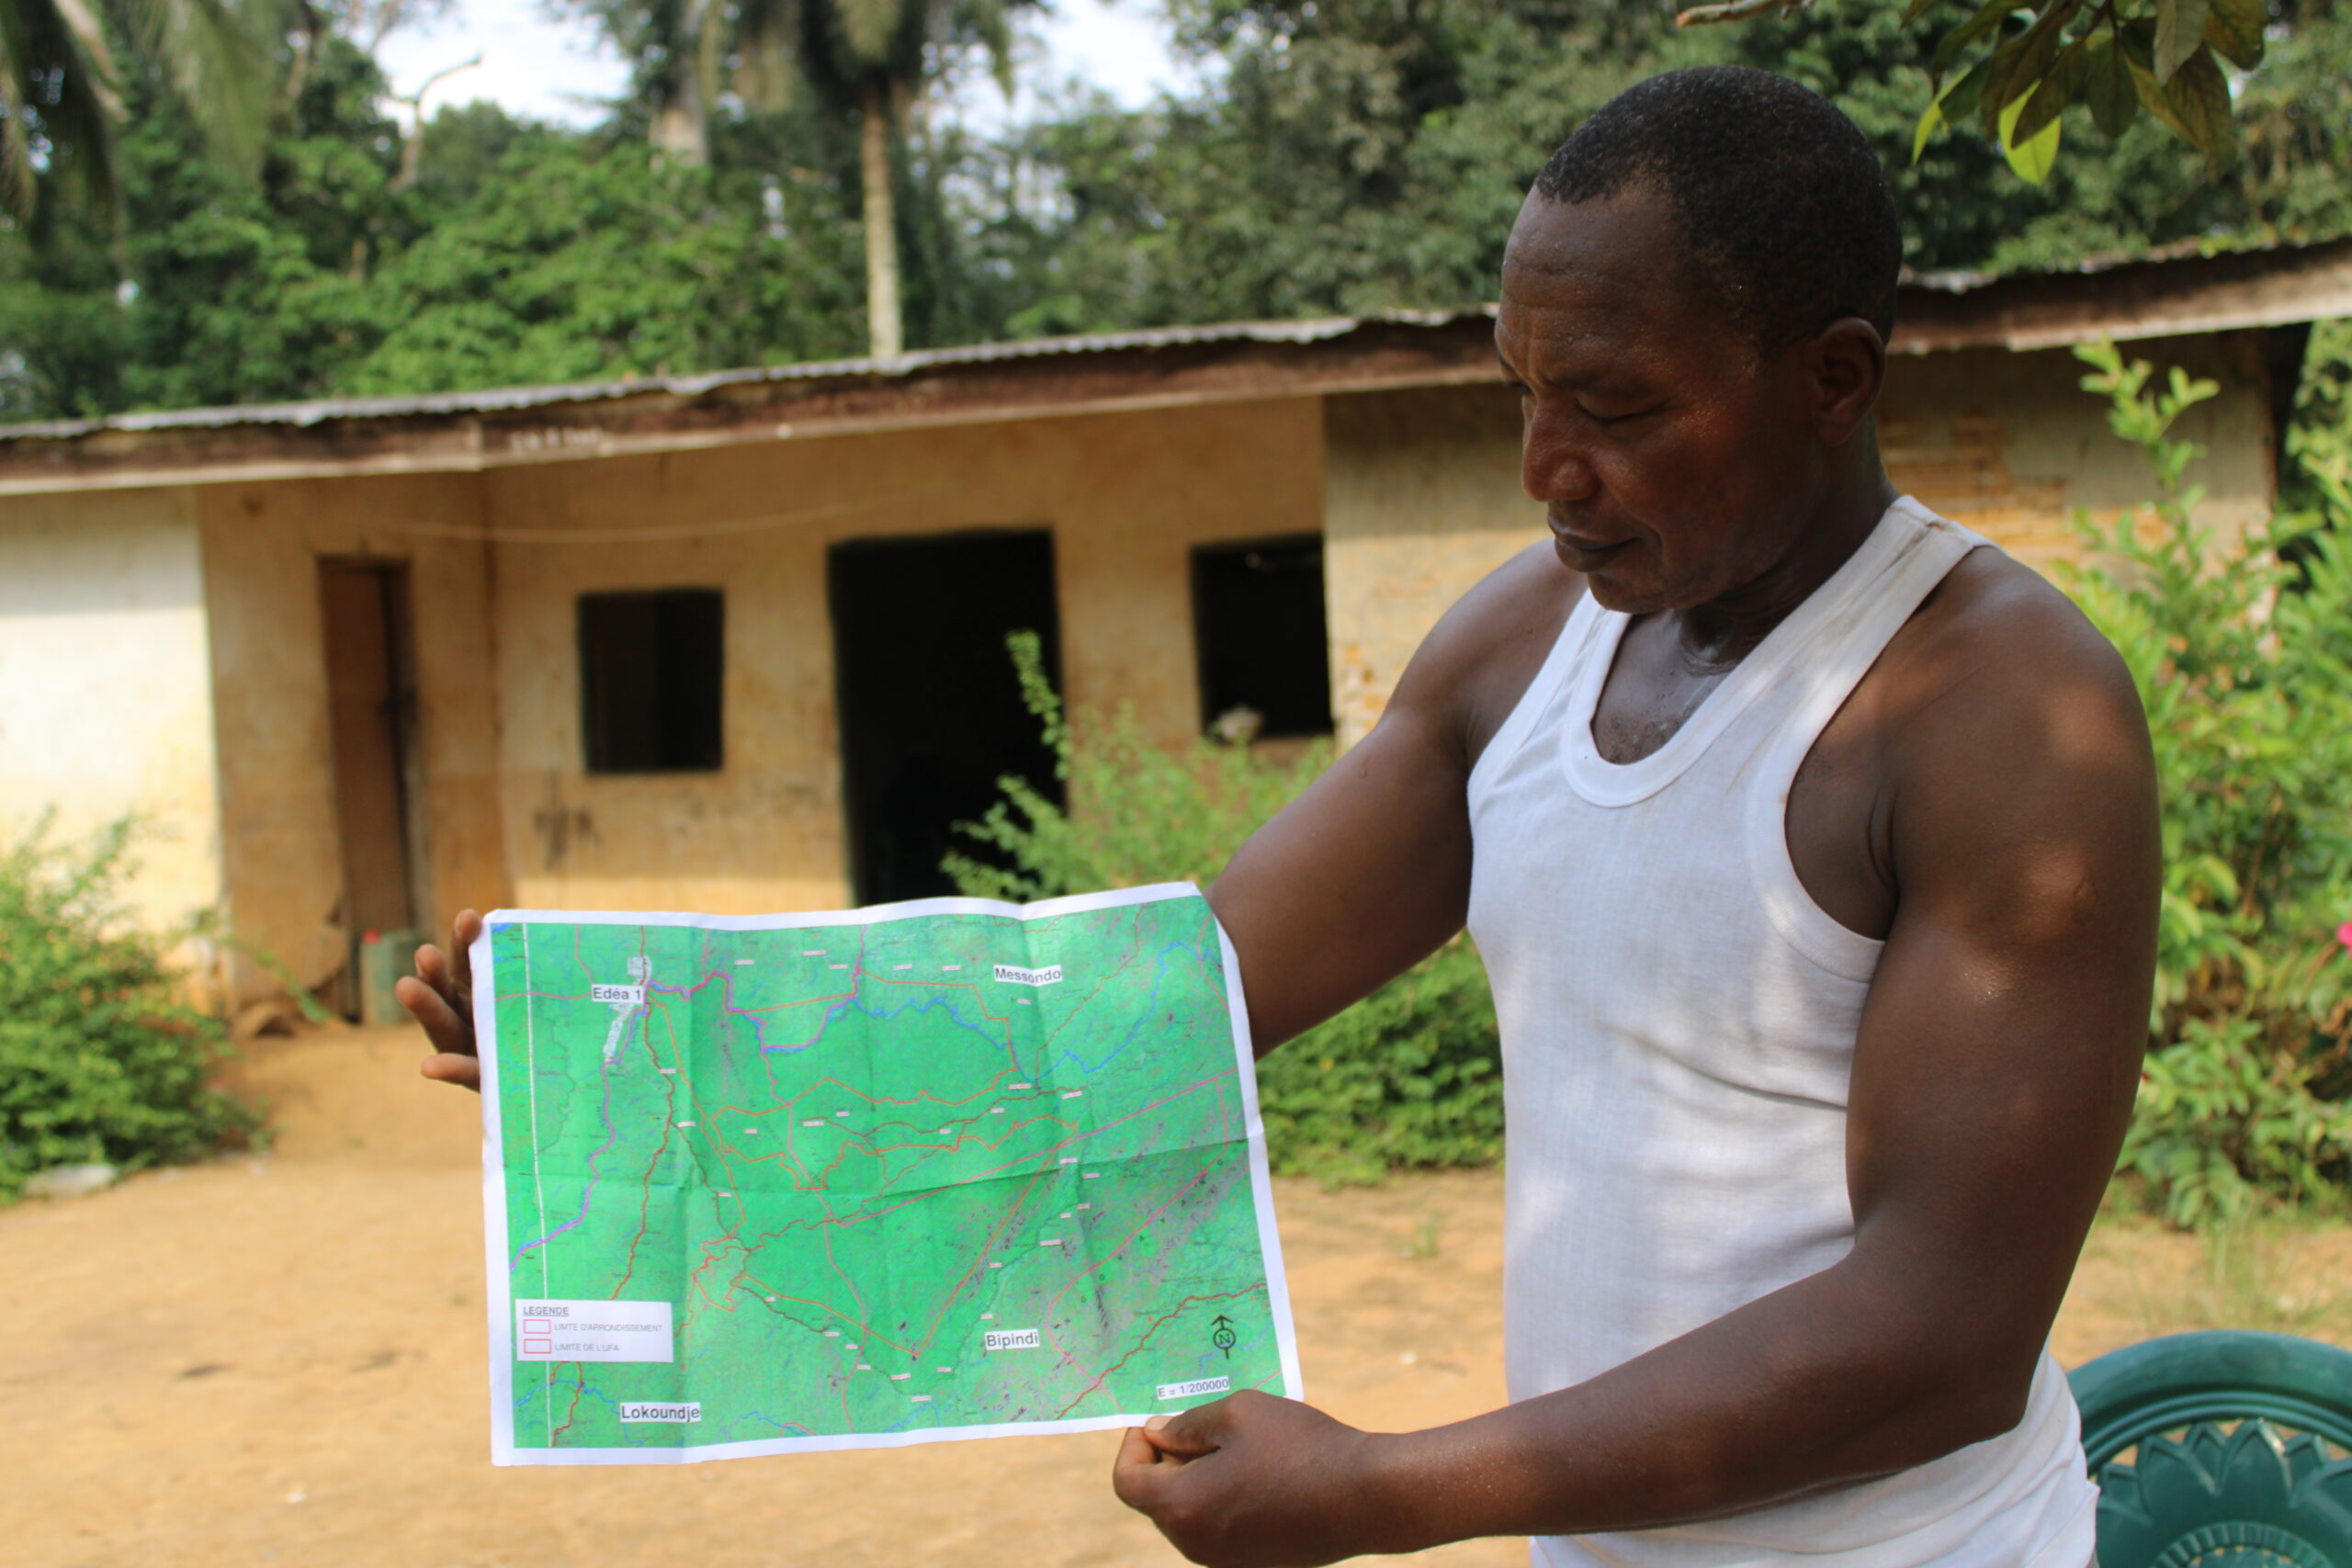 A native of Nkollo/South Cameroon showing how the map of the FMU to the communities members. Image by InfoCongo